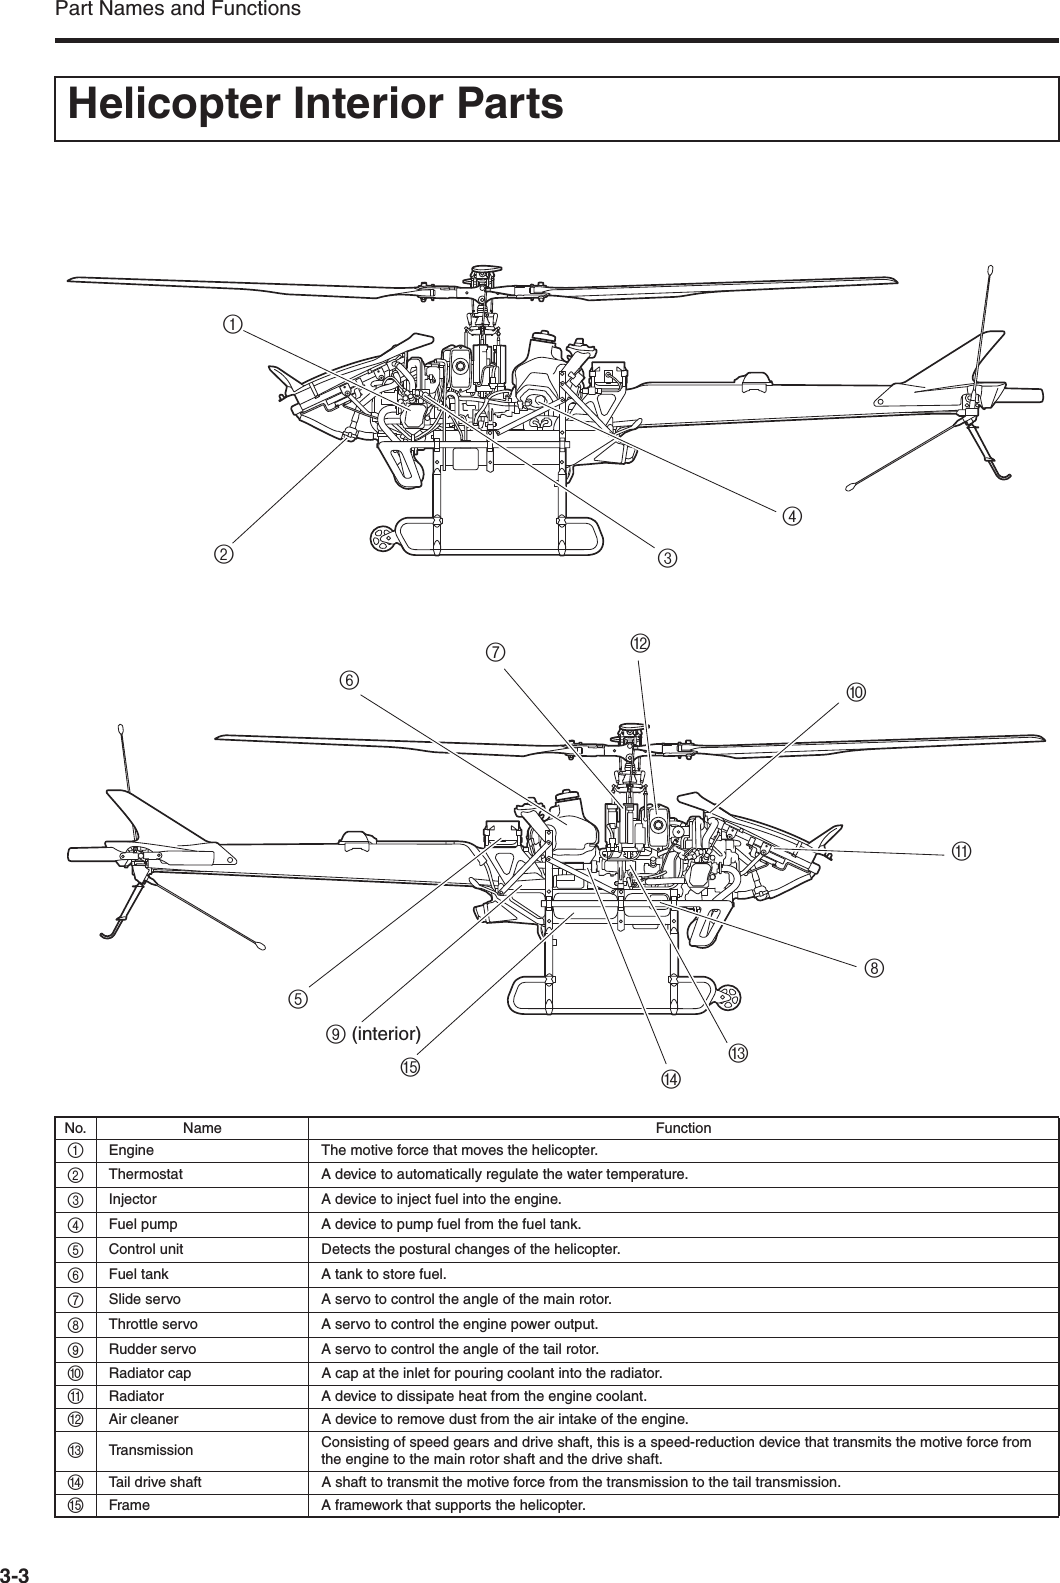 Part Names and Functions3-3Helicopter Interior Parts219 (interior)B4368AD70E5CNo. Name Function1Engine The motive force that moves the helicopter.2Thermostat A device to automatically regulate the water temperature.3Injector A device to inject fuel into the engine.4Fuel pump A device to pump fuel from the fuel tank.5Control unit Detects the postural changes of the helicopter.6Fuel tank A tank to store fuel.7Slide servo A servo to control the angle of the main rotor.8Throttle servo A servo to control the engine power output.9Rudder servo A servo to control the angle of the tail rotor.0Radiator cap A cap at the inlet for pouring coolant into the radiator.ARadiator A device to dissipate heat from the engine coolant.BAir cleaner A device to remove dust from the air intake of the engine.CTransmission Consisting of speed gears and drive shaft, this is a speed-reduction device that transmits the motive force from the engine to the main rotor shaft and the drive shaft. DTail drive shaft A shaft to transmit the motive force from the transmission to the tail transmission.EFrame A framework that supports the helicopter.